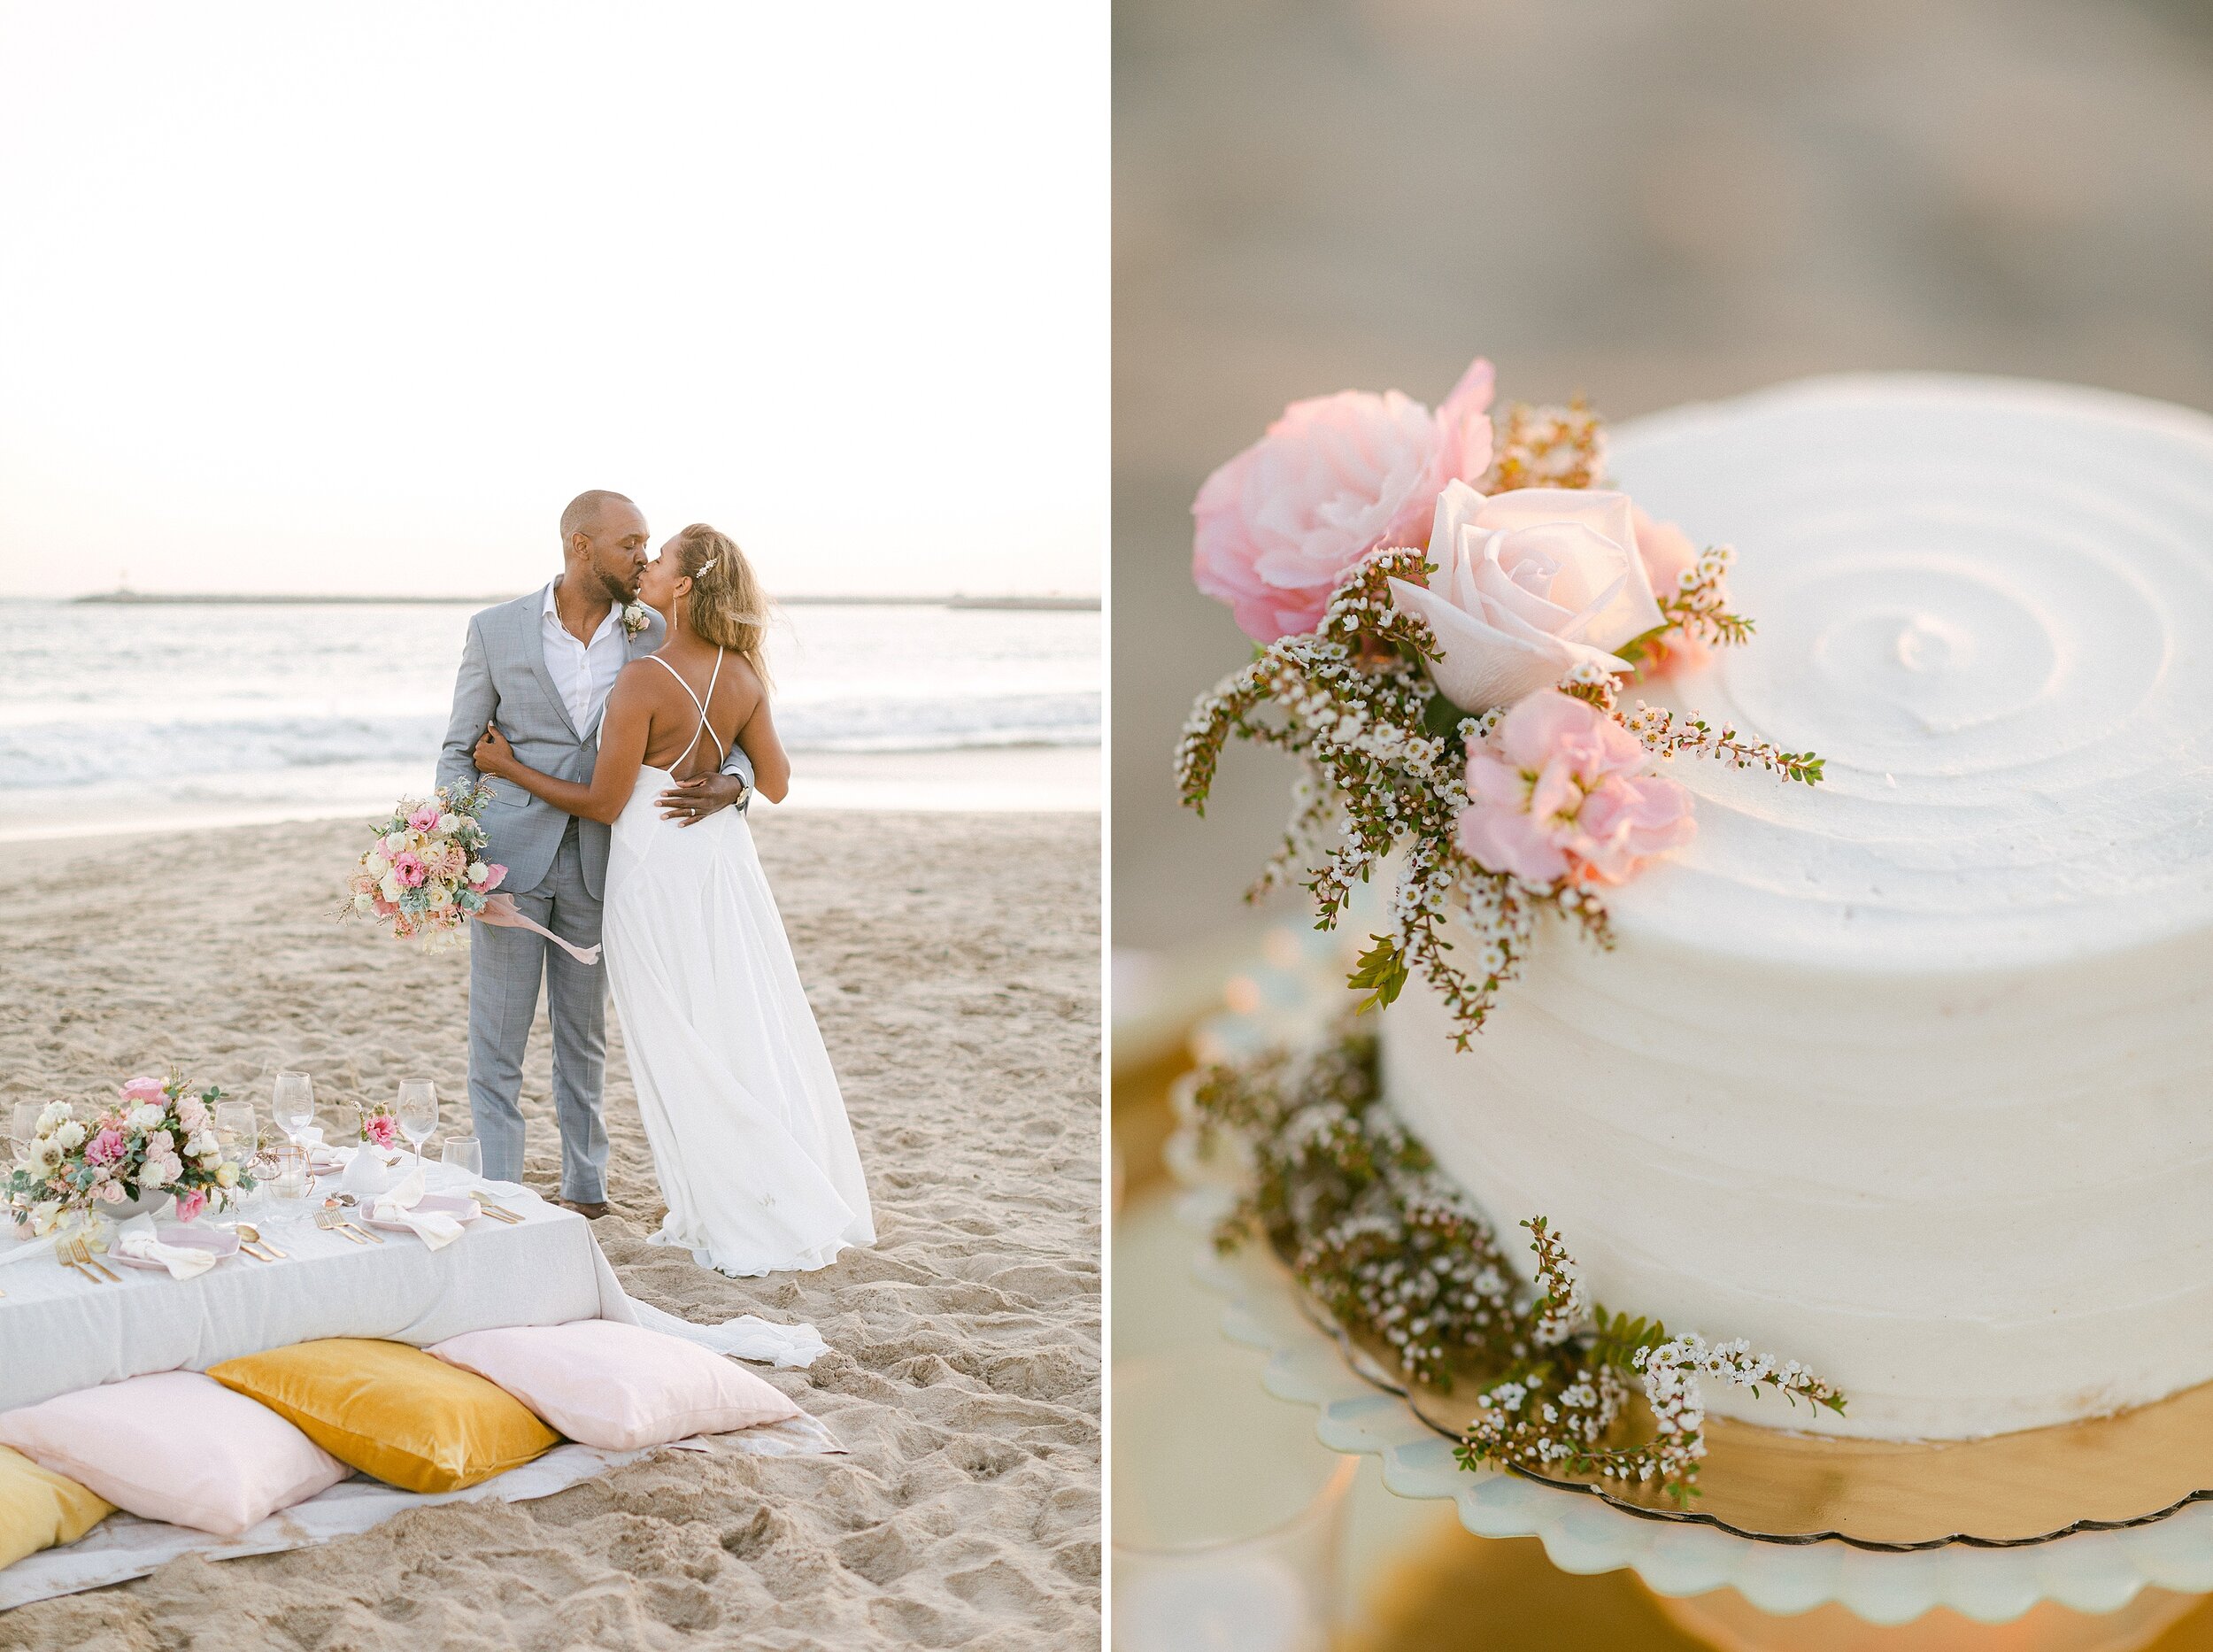 Bride and groom kiss near their intimate beachside reception following their elopement.  Groom is facing towards the camera while the bride faces towards her groom, showcasing the back of her wedding gown.